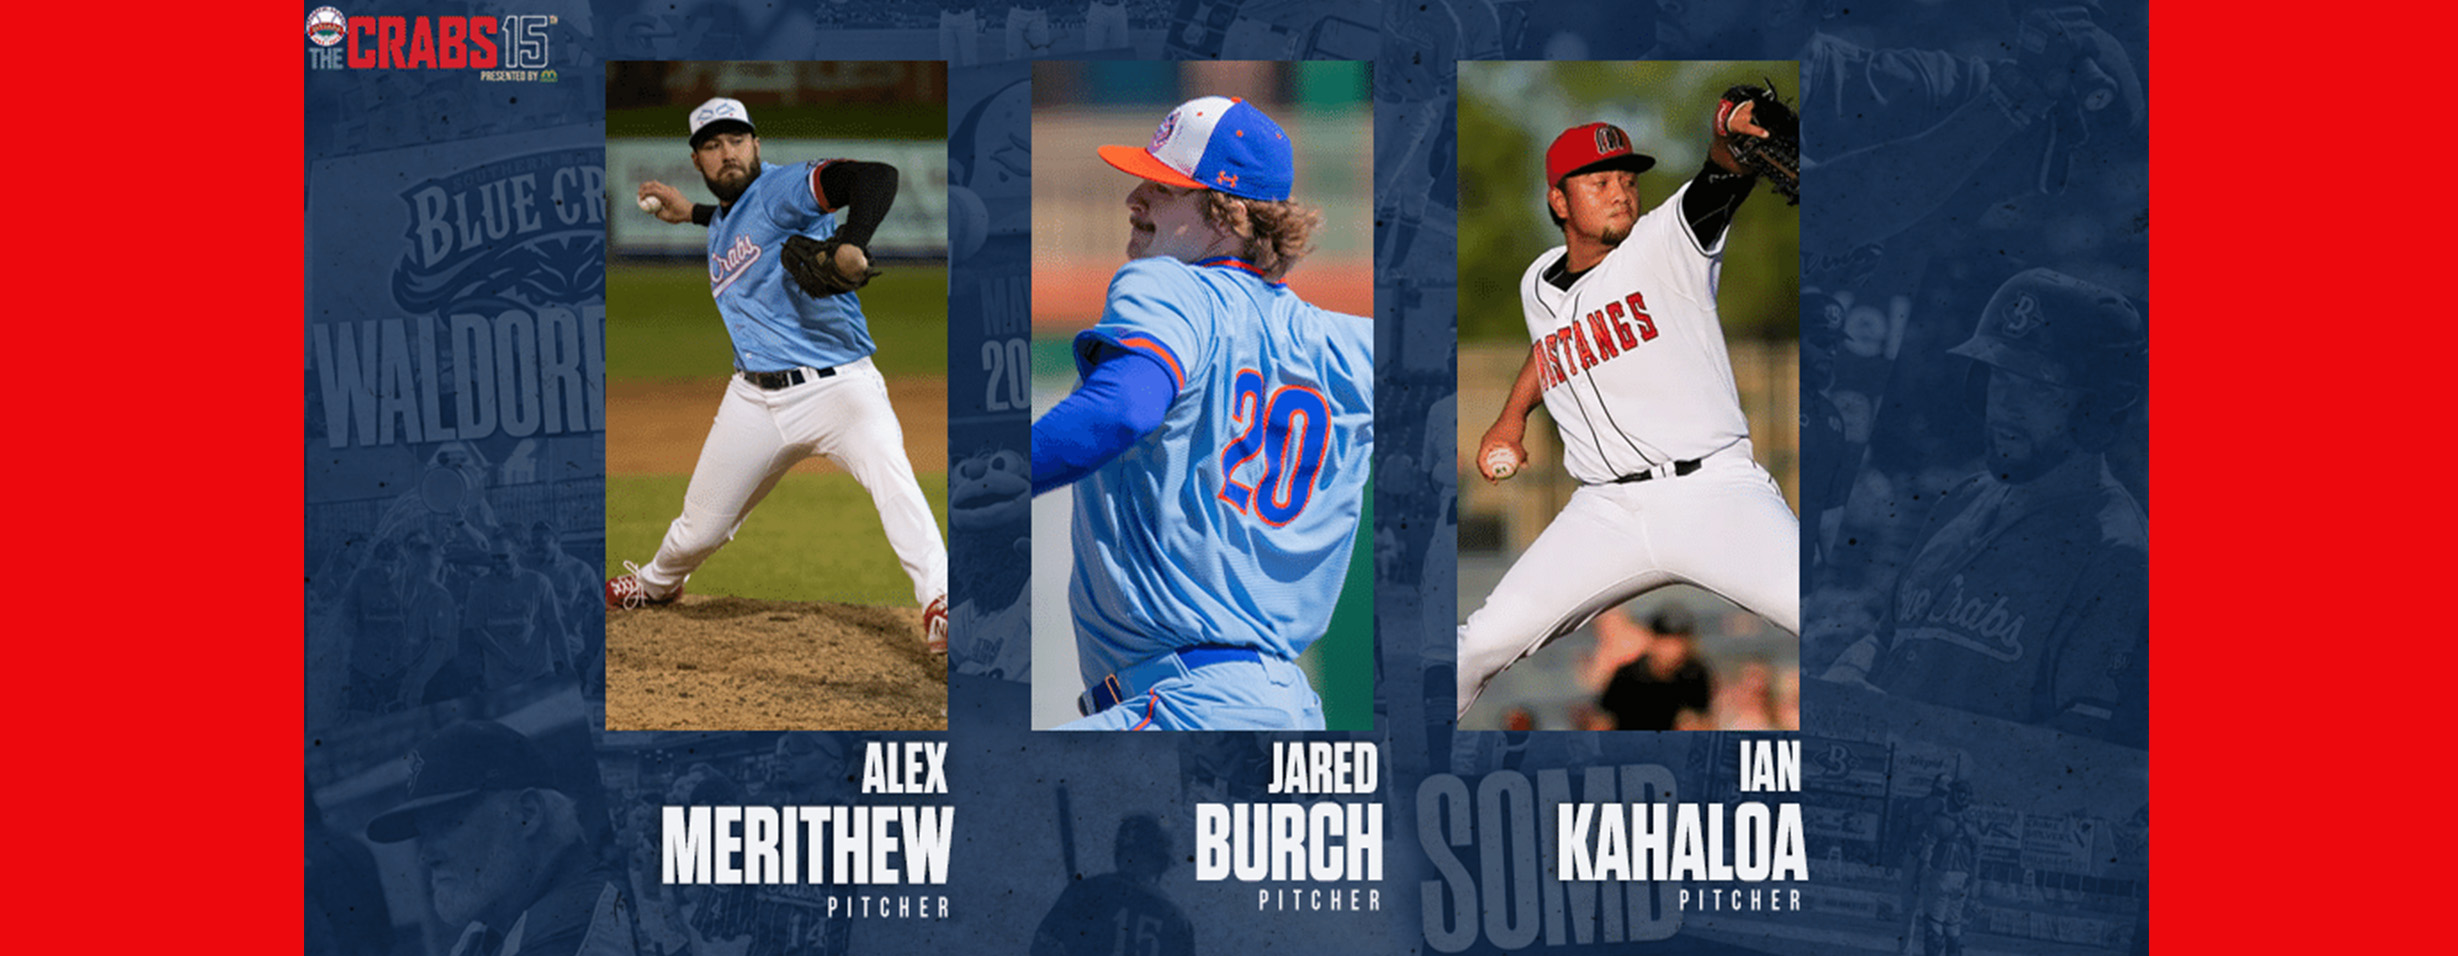 Blue Crabs Welcome Burch and Kahaloa as Merithew returns for second season